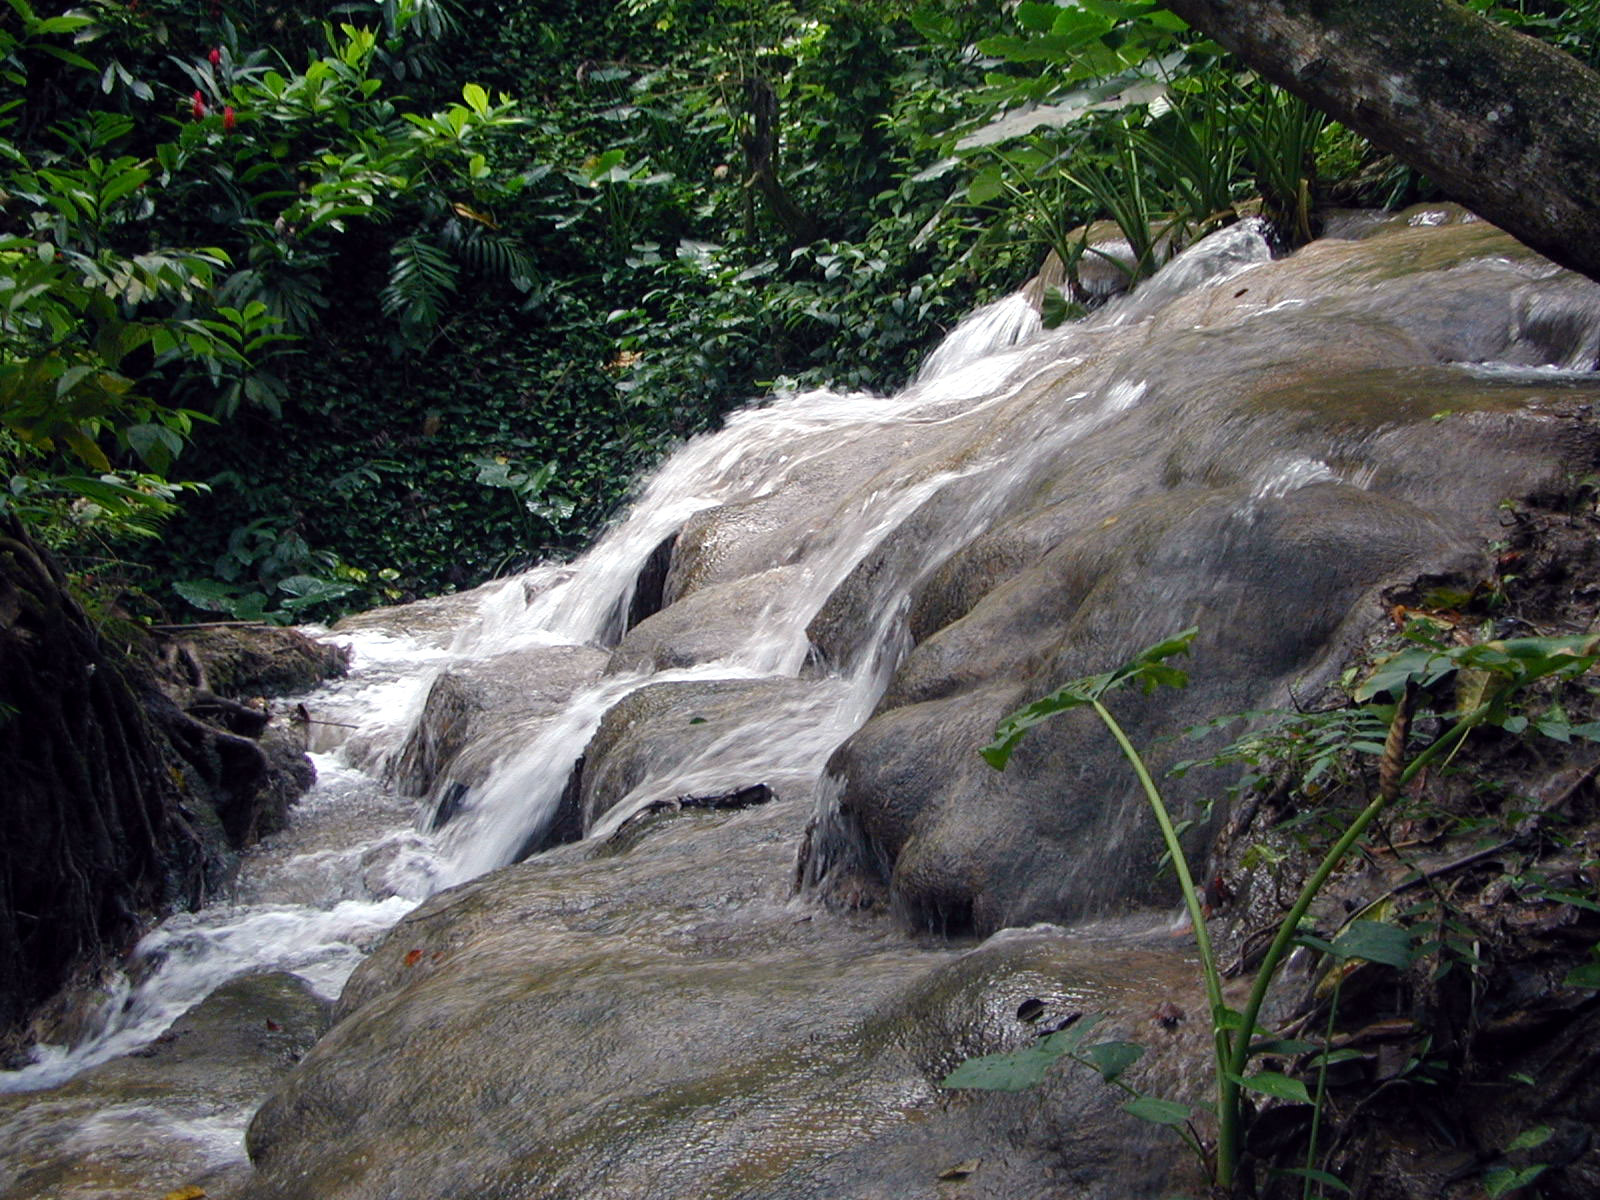 the stream runs in to the jungle with many trees